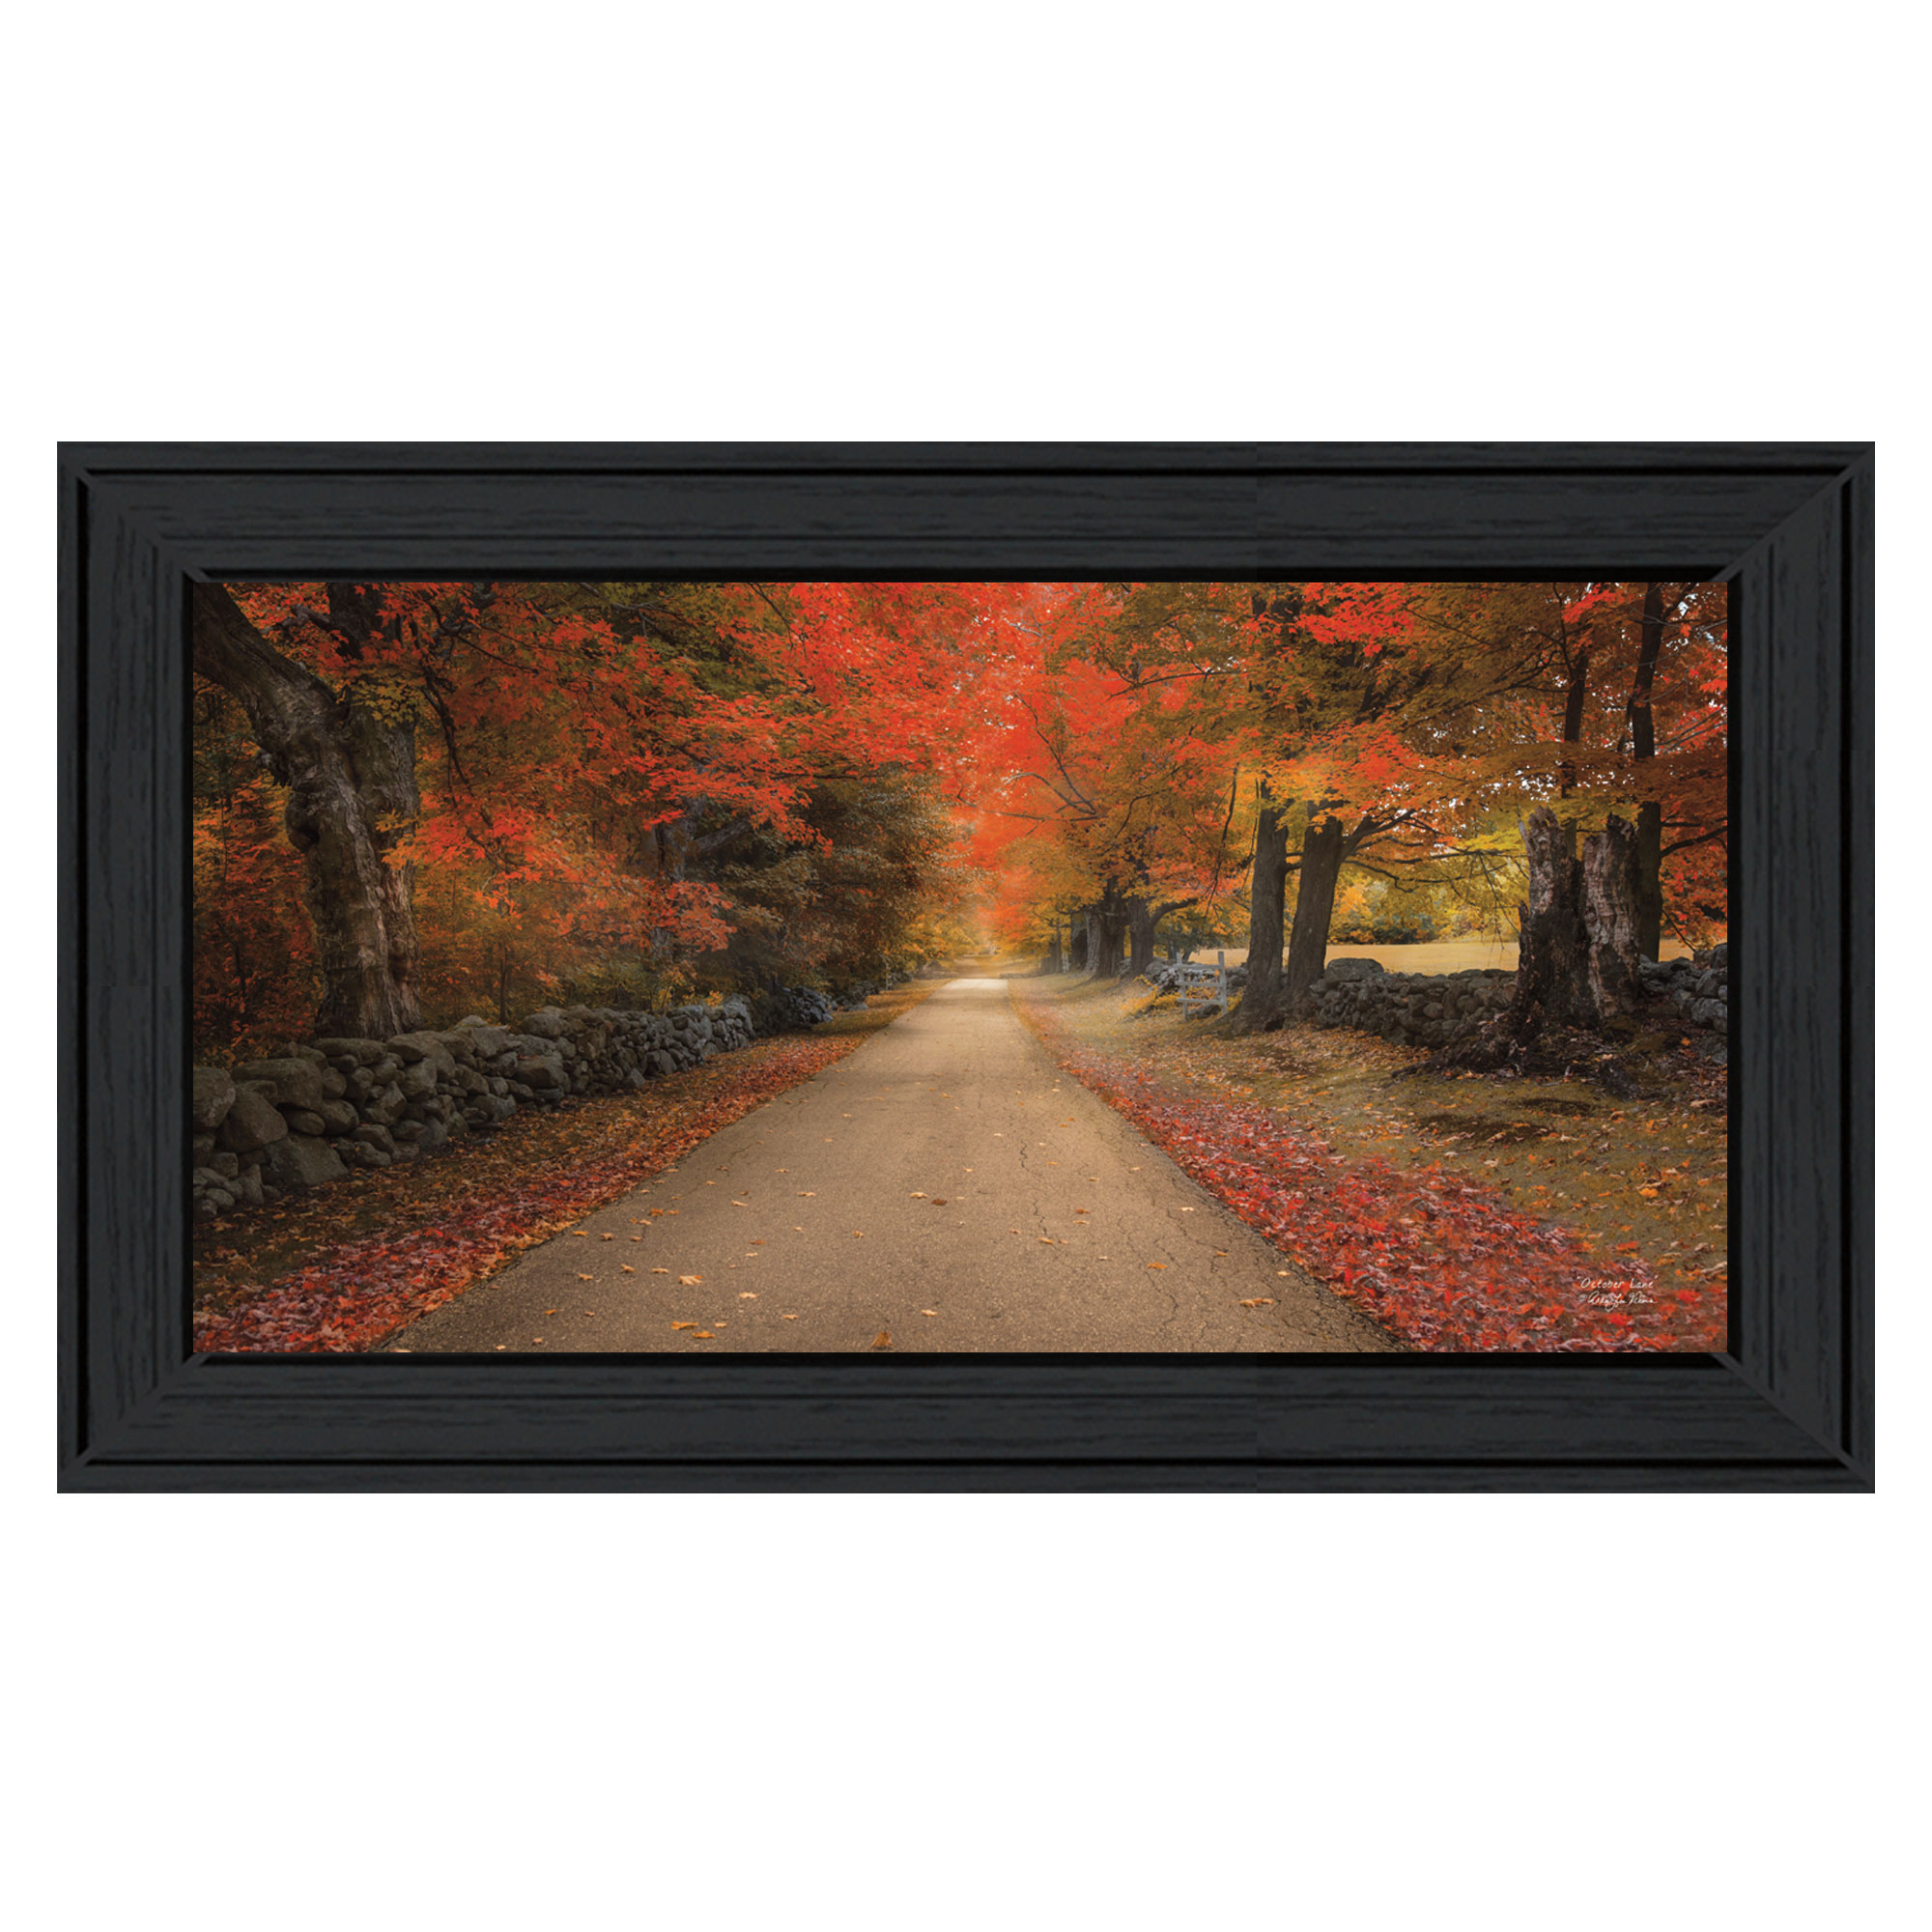 "October Lane" By Robin-Lee Vieira, Printed Wall Art, Ready To Hang Framed Poster, Black Frame